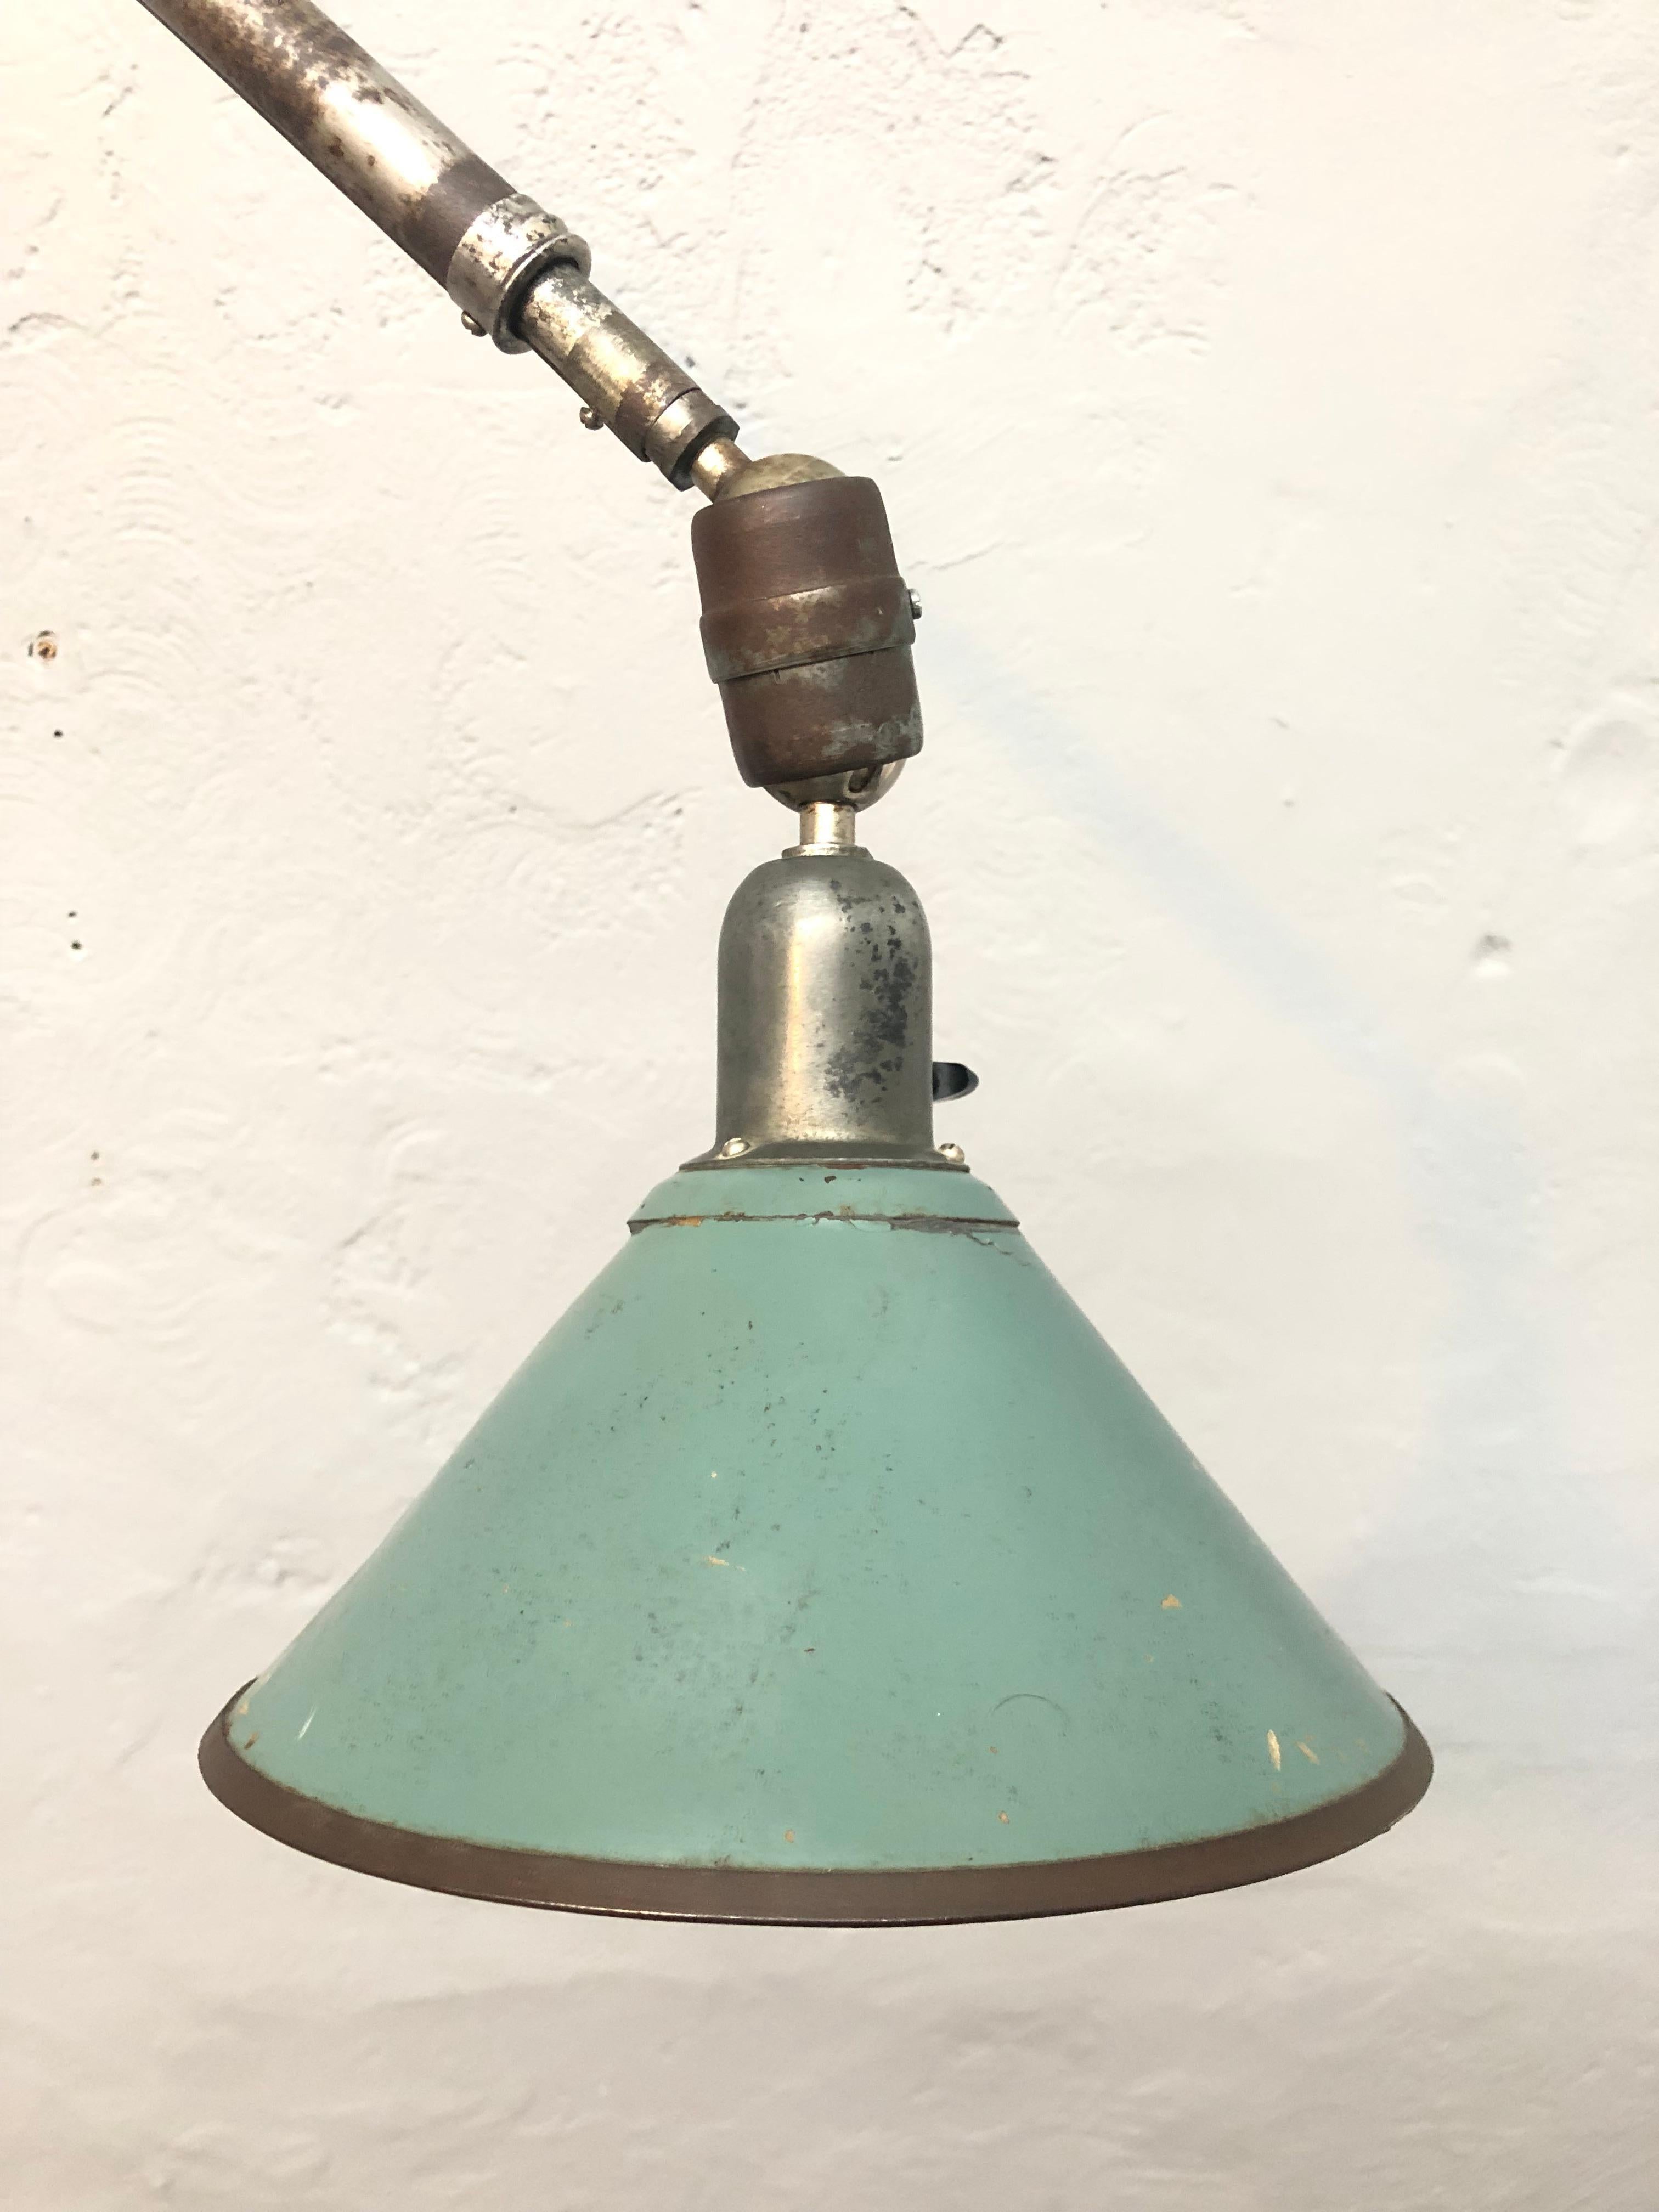 Swedish Rare Series 1 Antique Triplex Industrial Lamp by Johan Petter Johansson for ASEA For Sale